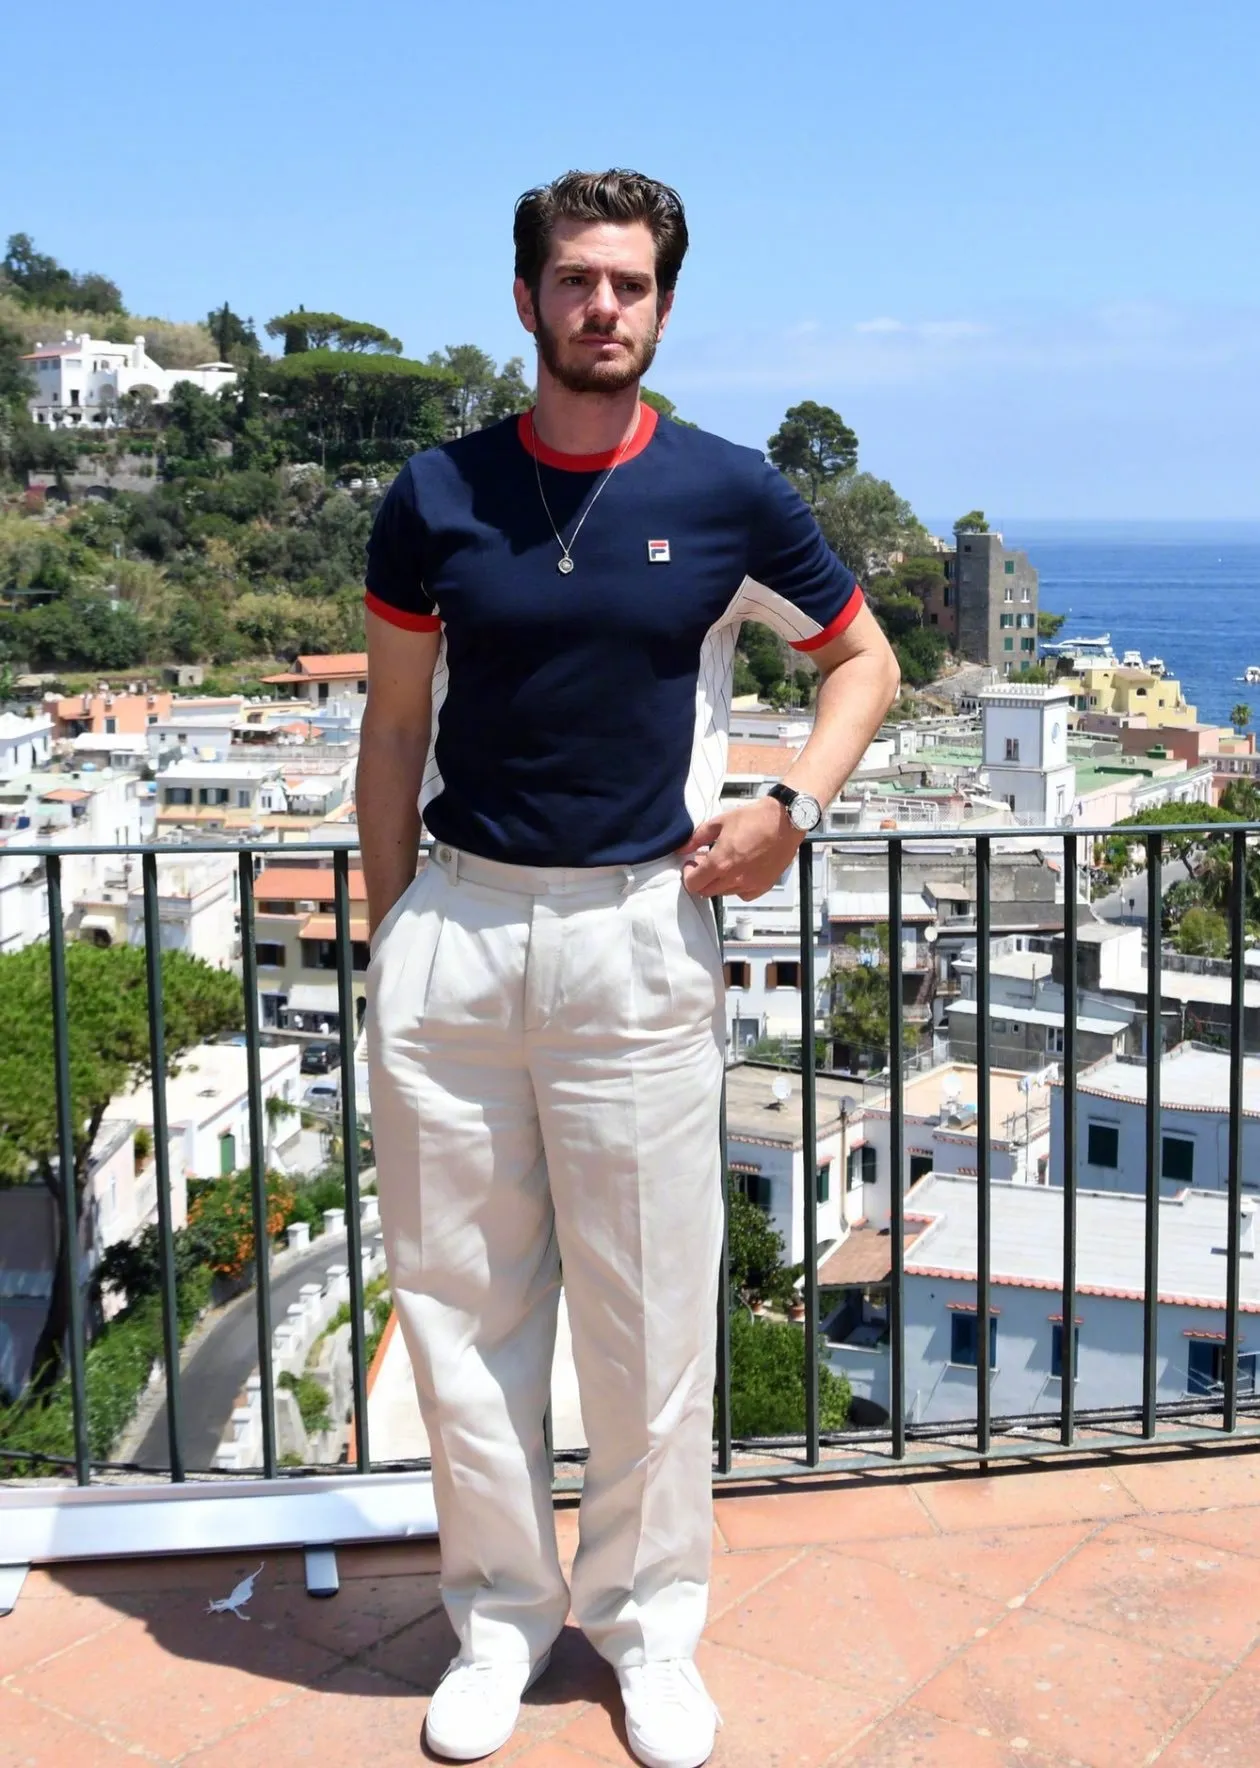 Andrew Garfield recently in Italy to participate in activities | FMV6